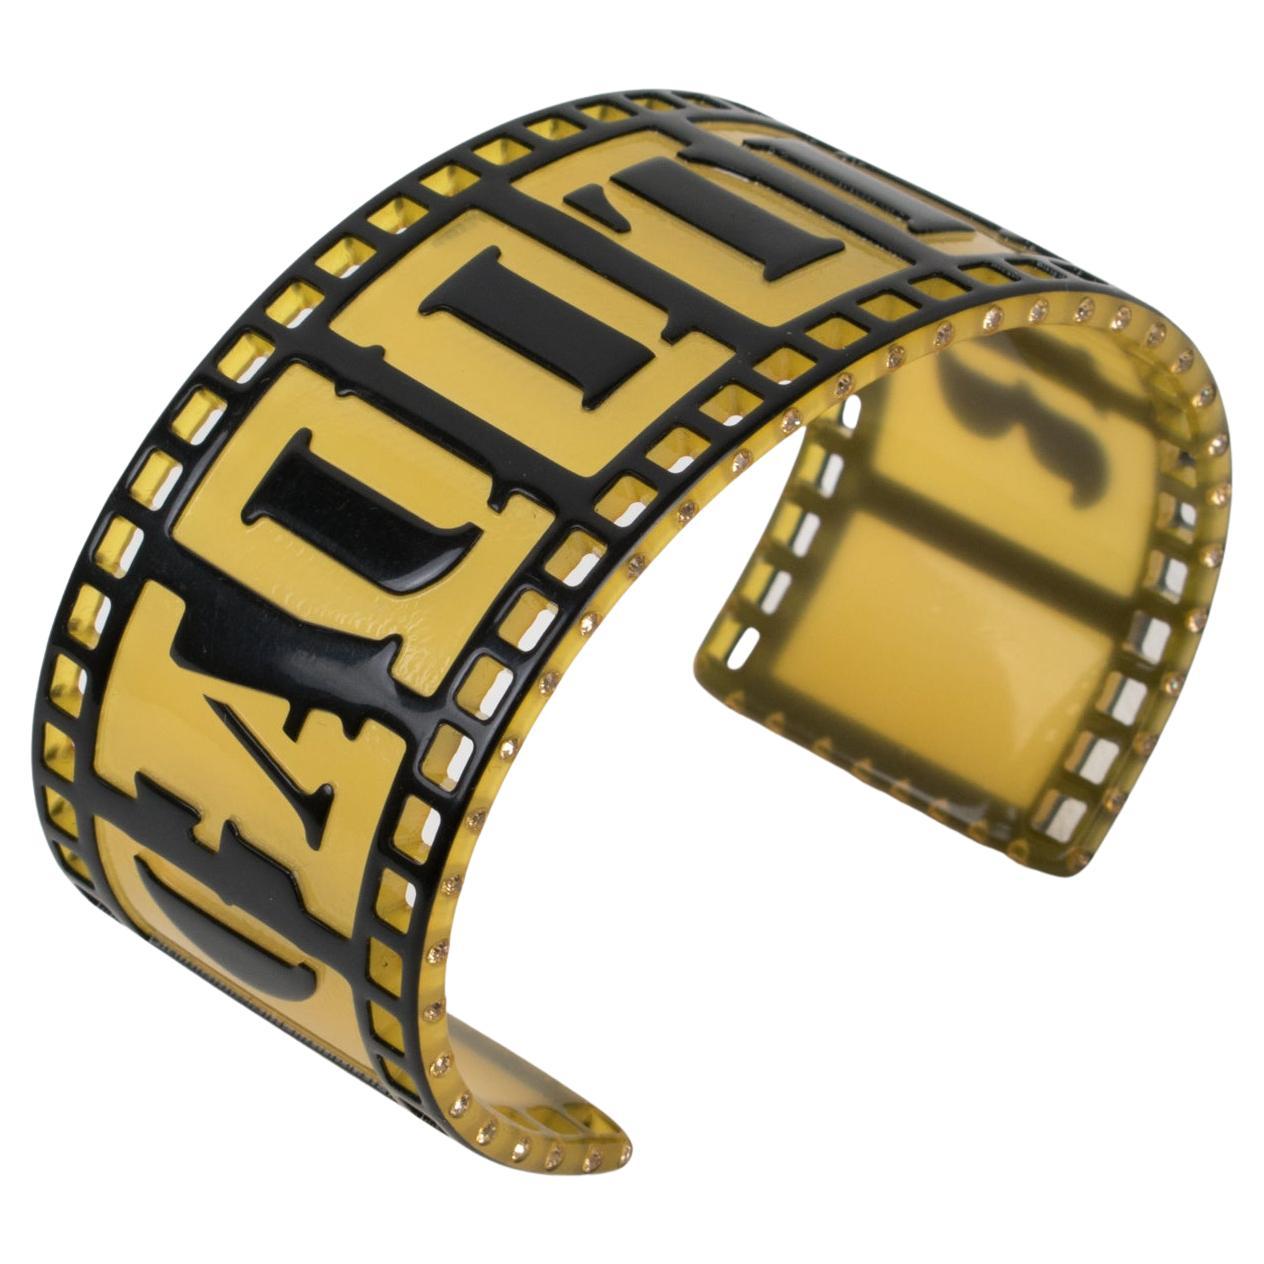 Jean Paul Gaultier Runway Black and Yellow Resin Cuff Bracelet Old Film Strip For Sale